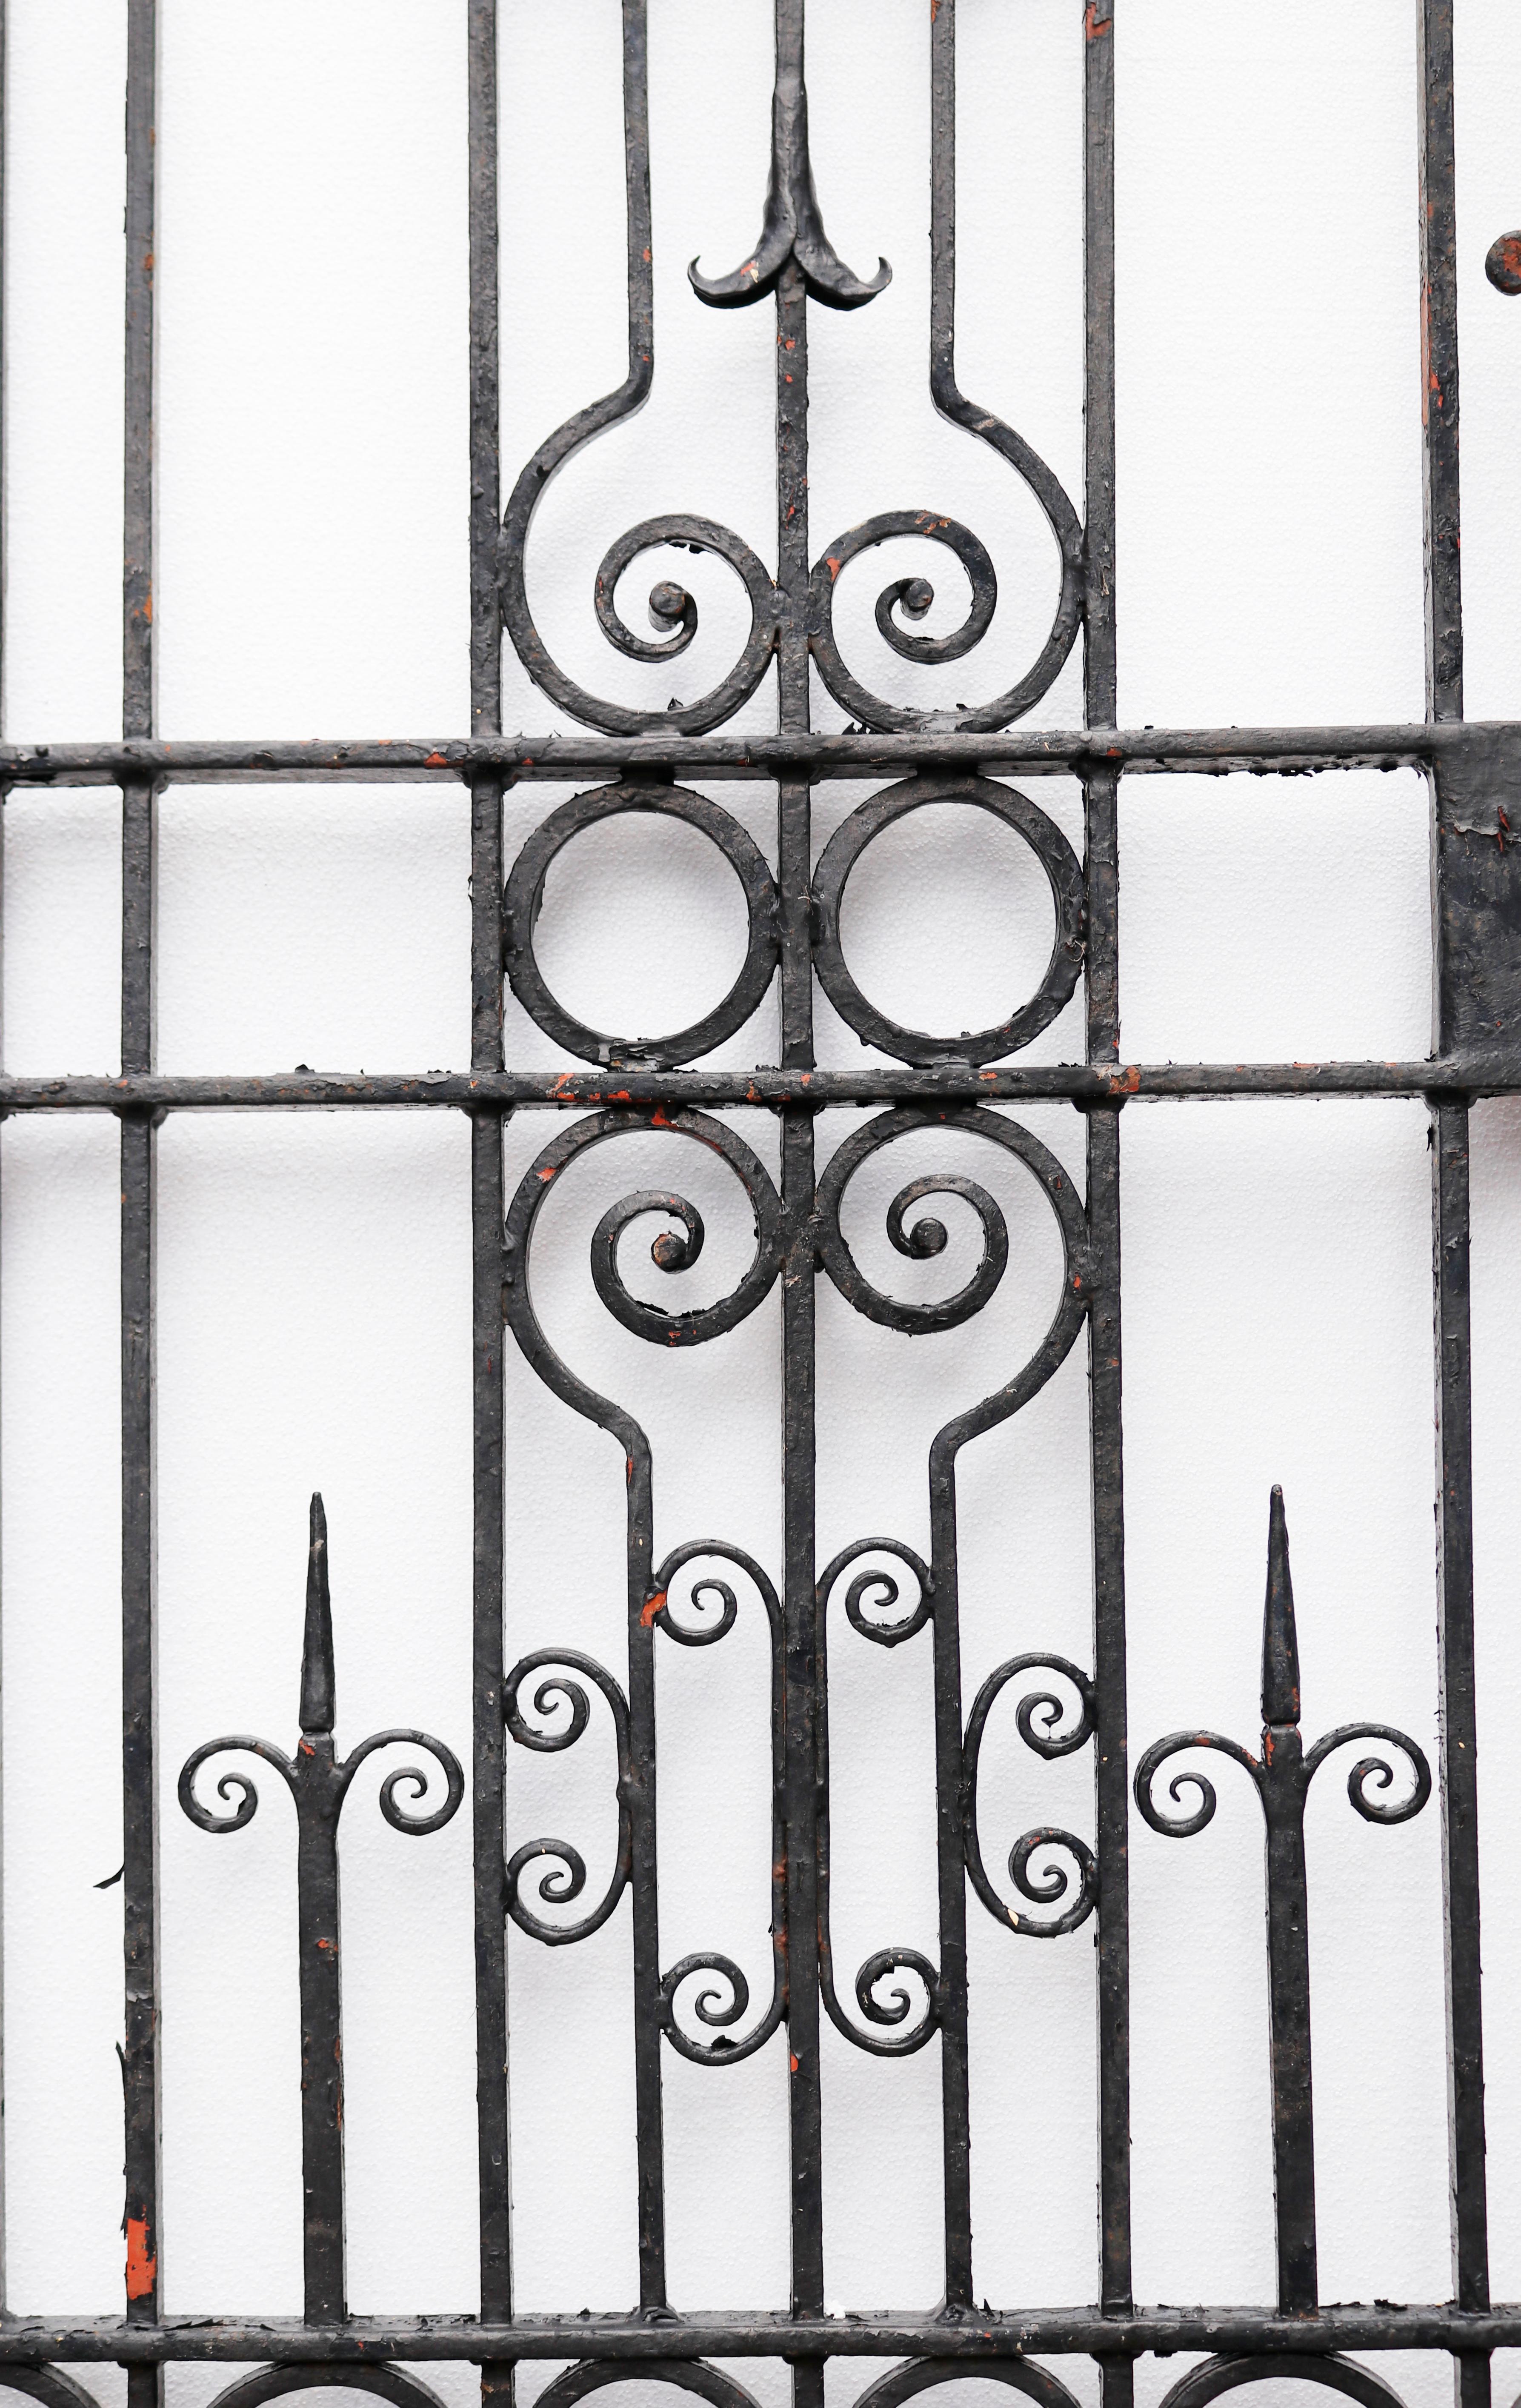 A reclaimed side gate made of wrought iron in the traditional style.

There is a matching set of wrought iron driveway gates available.